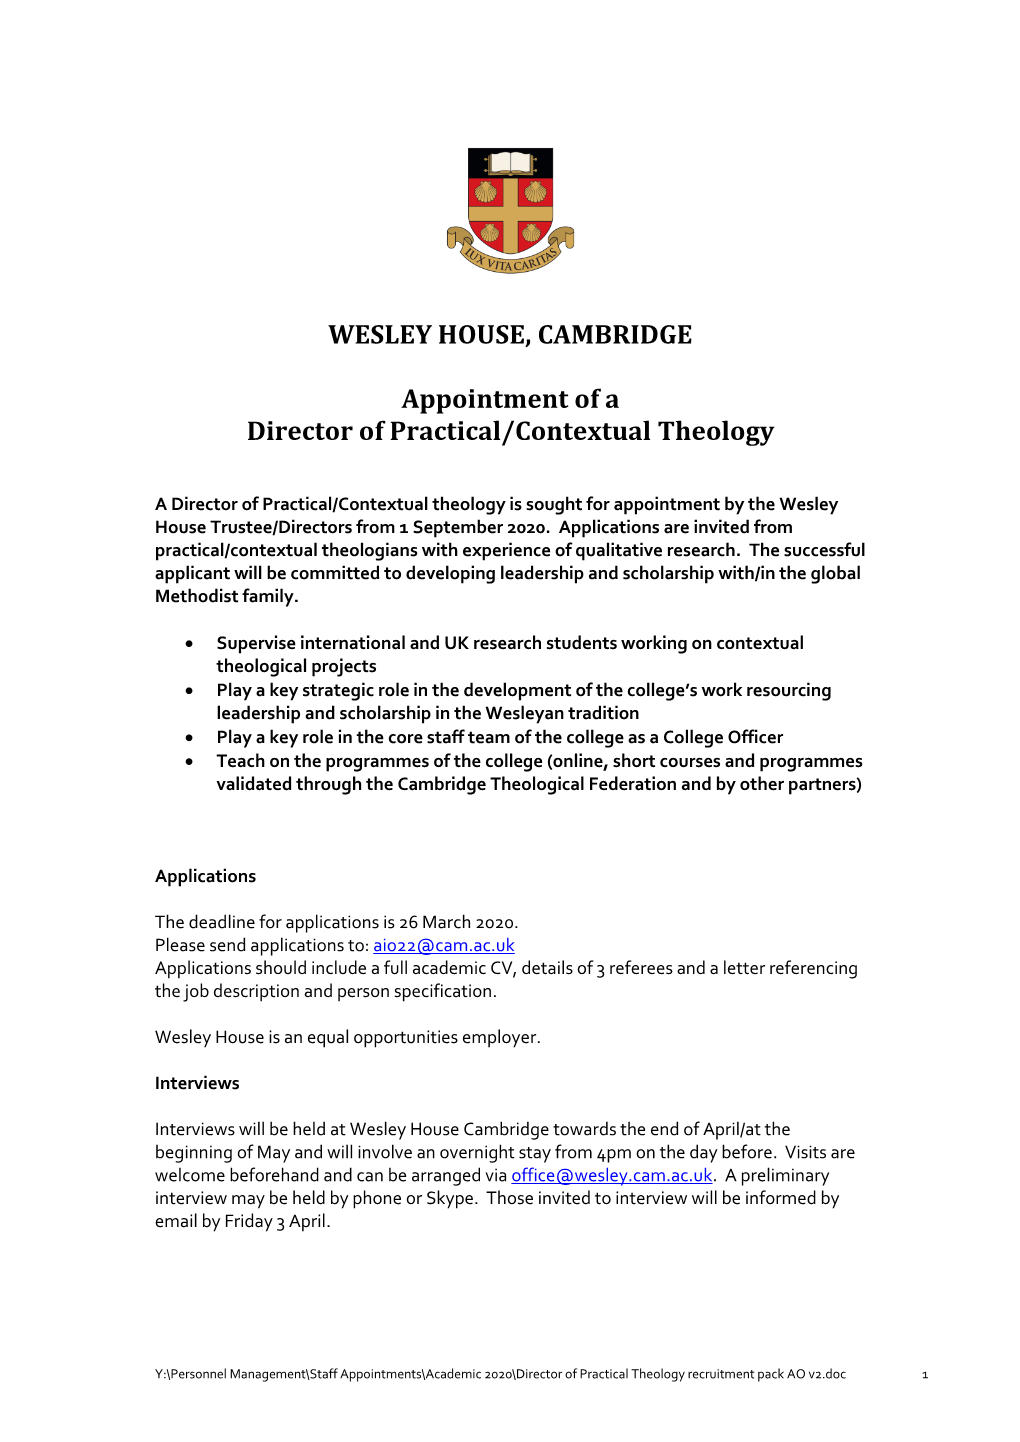 WESLEY HOUSE, CAMBRIDGE Appointment of a Director Of